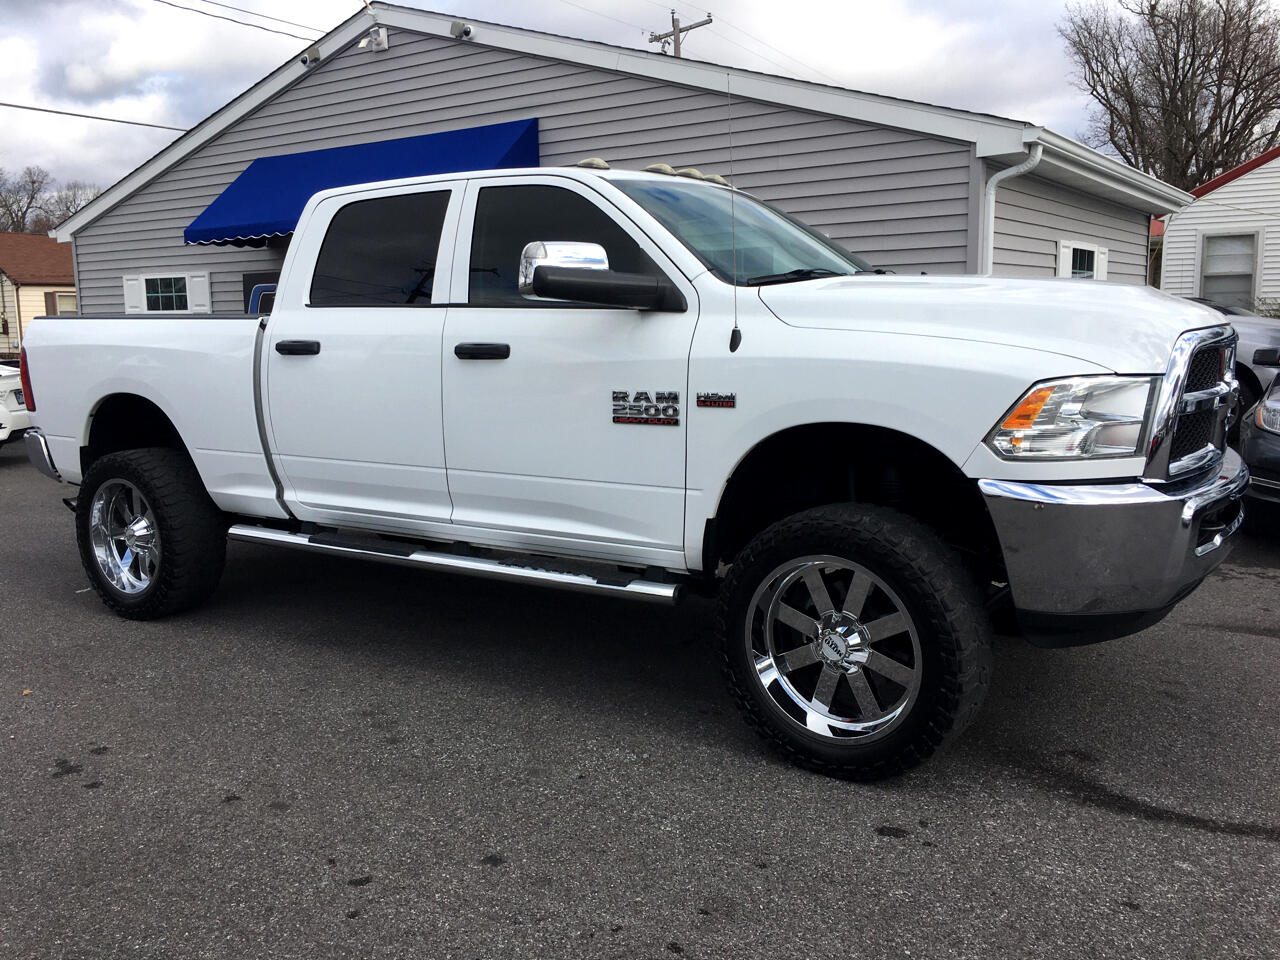 Used 2016 Ram 2500 Tradesman 4wd For Sale In Paducah Ky